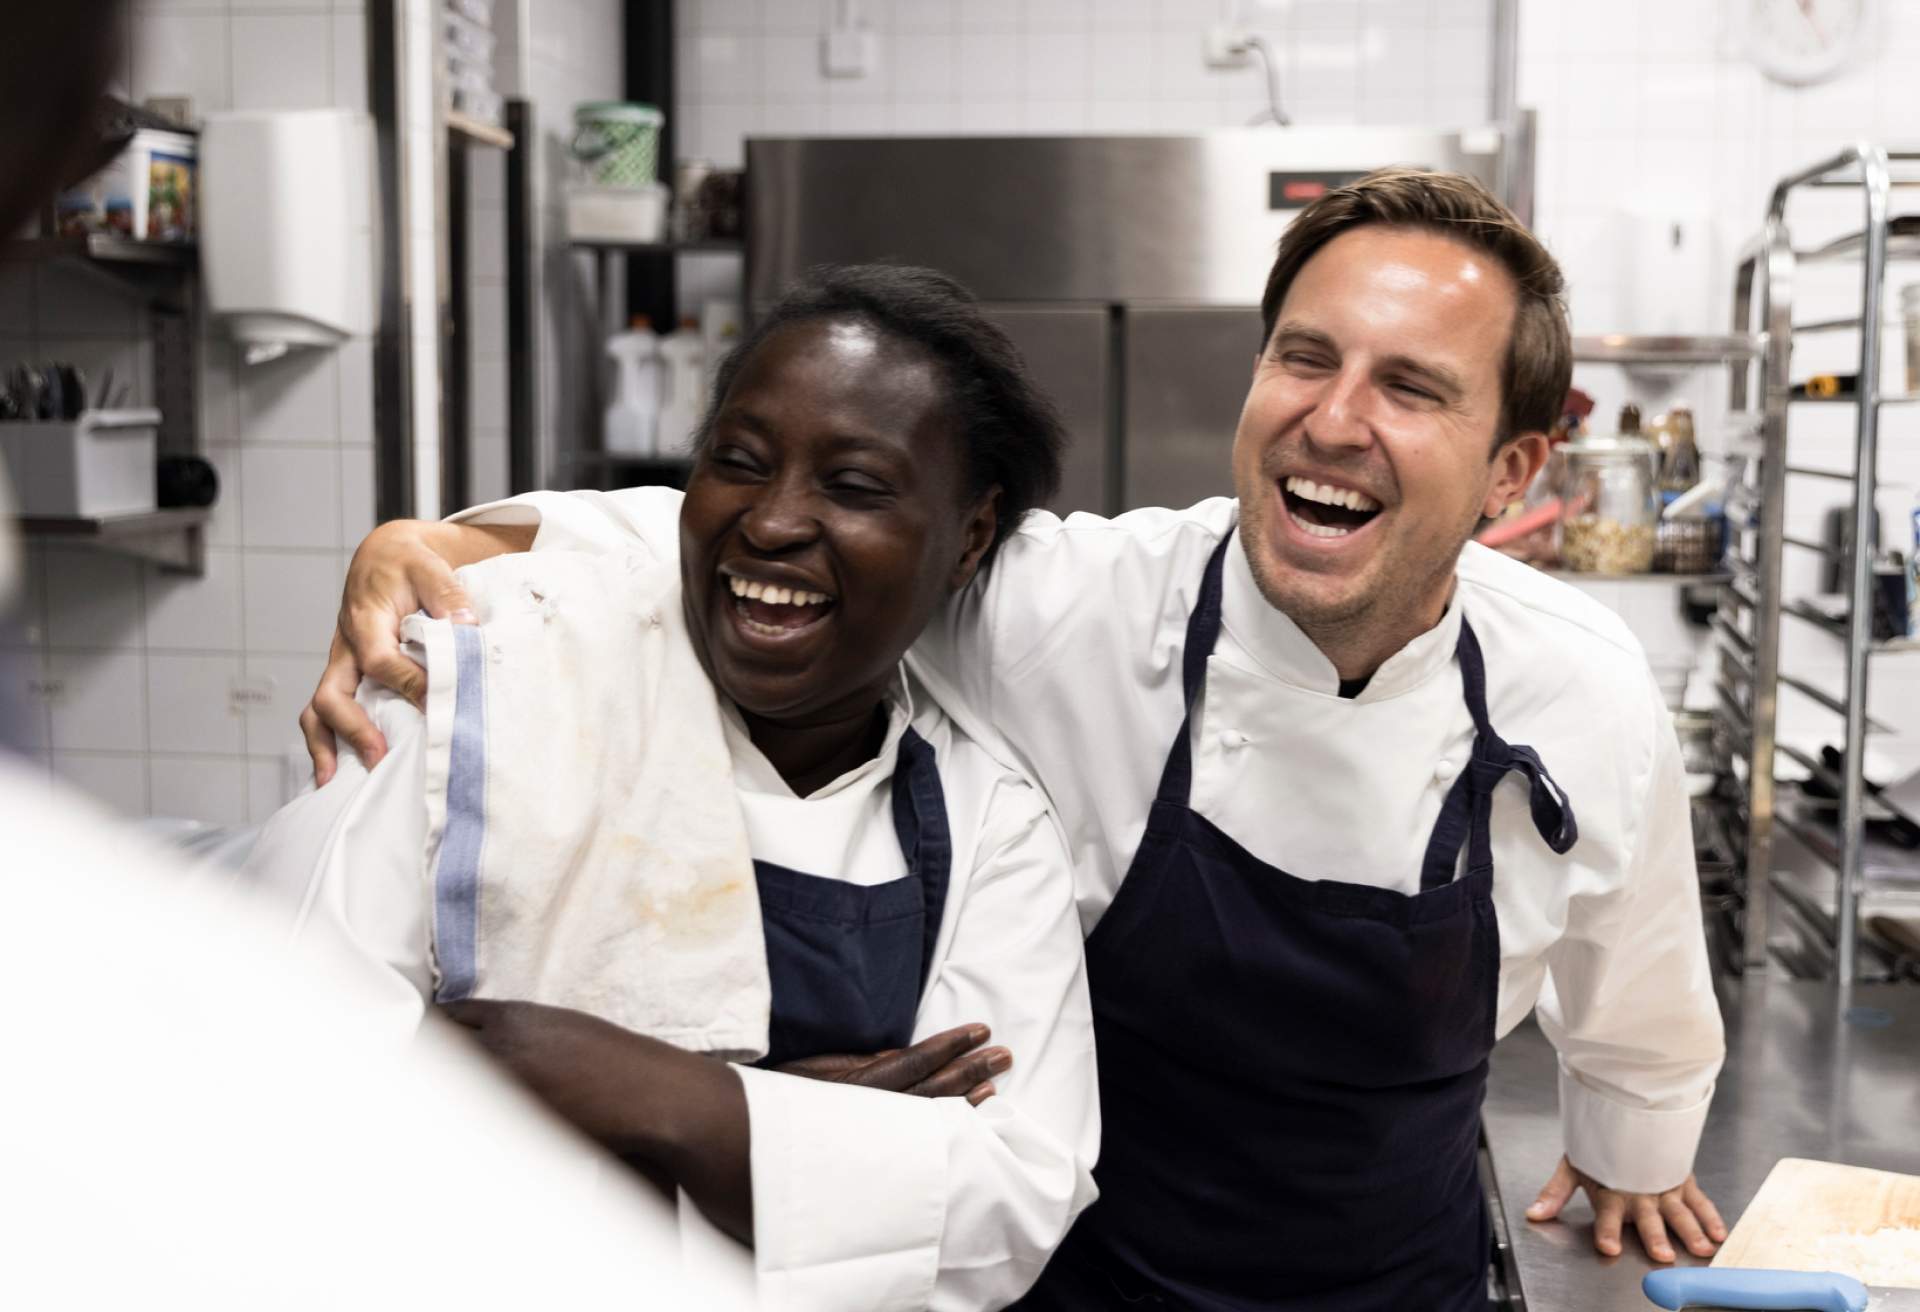 Employees laughing during restaurant training